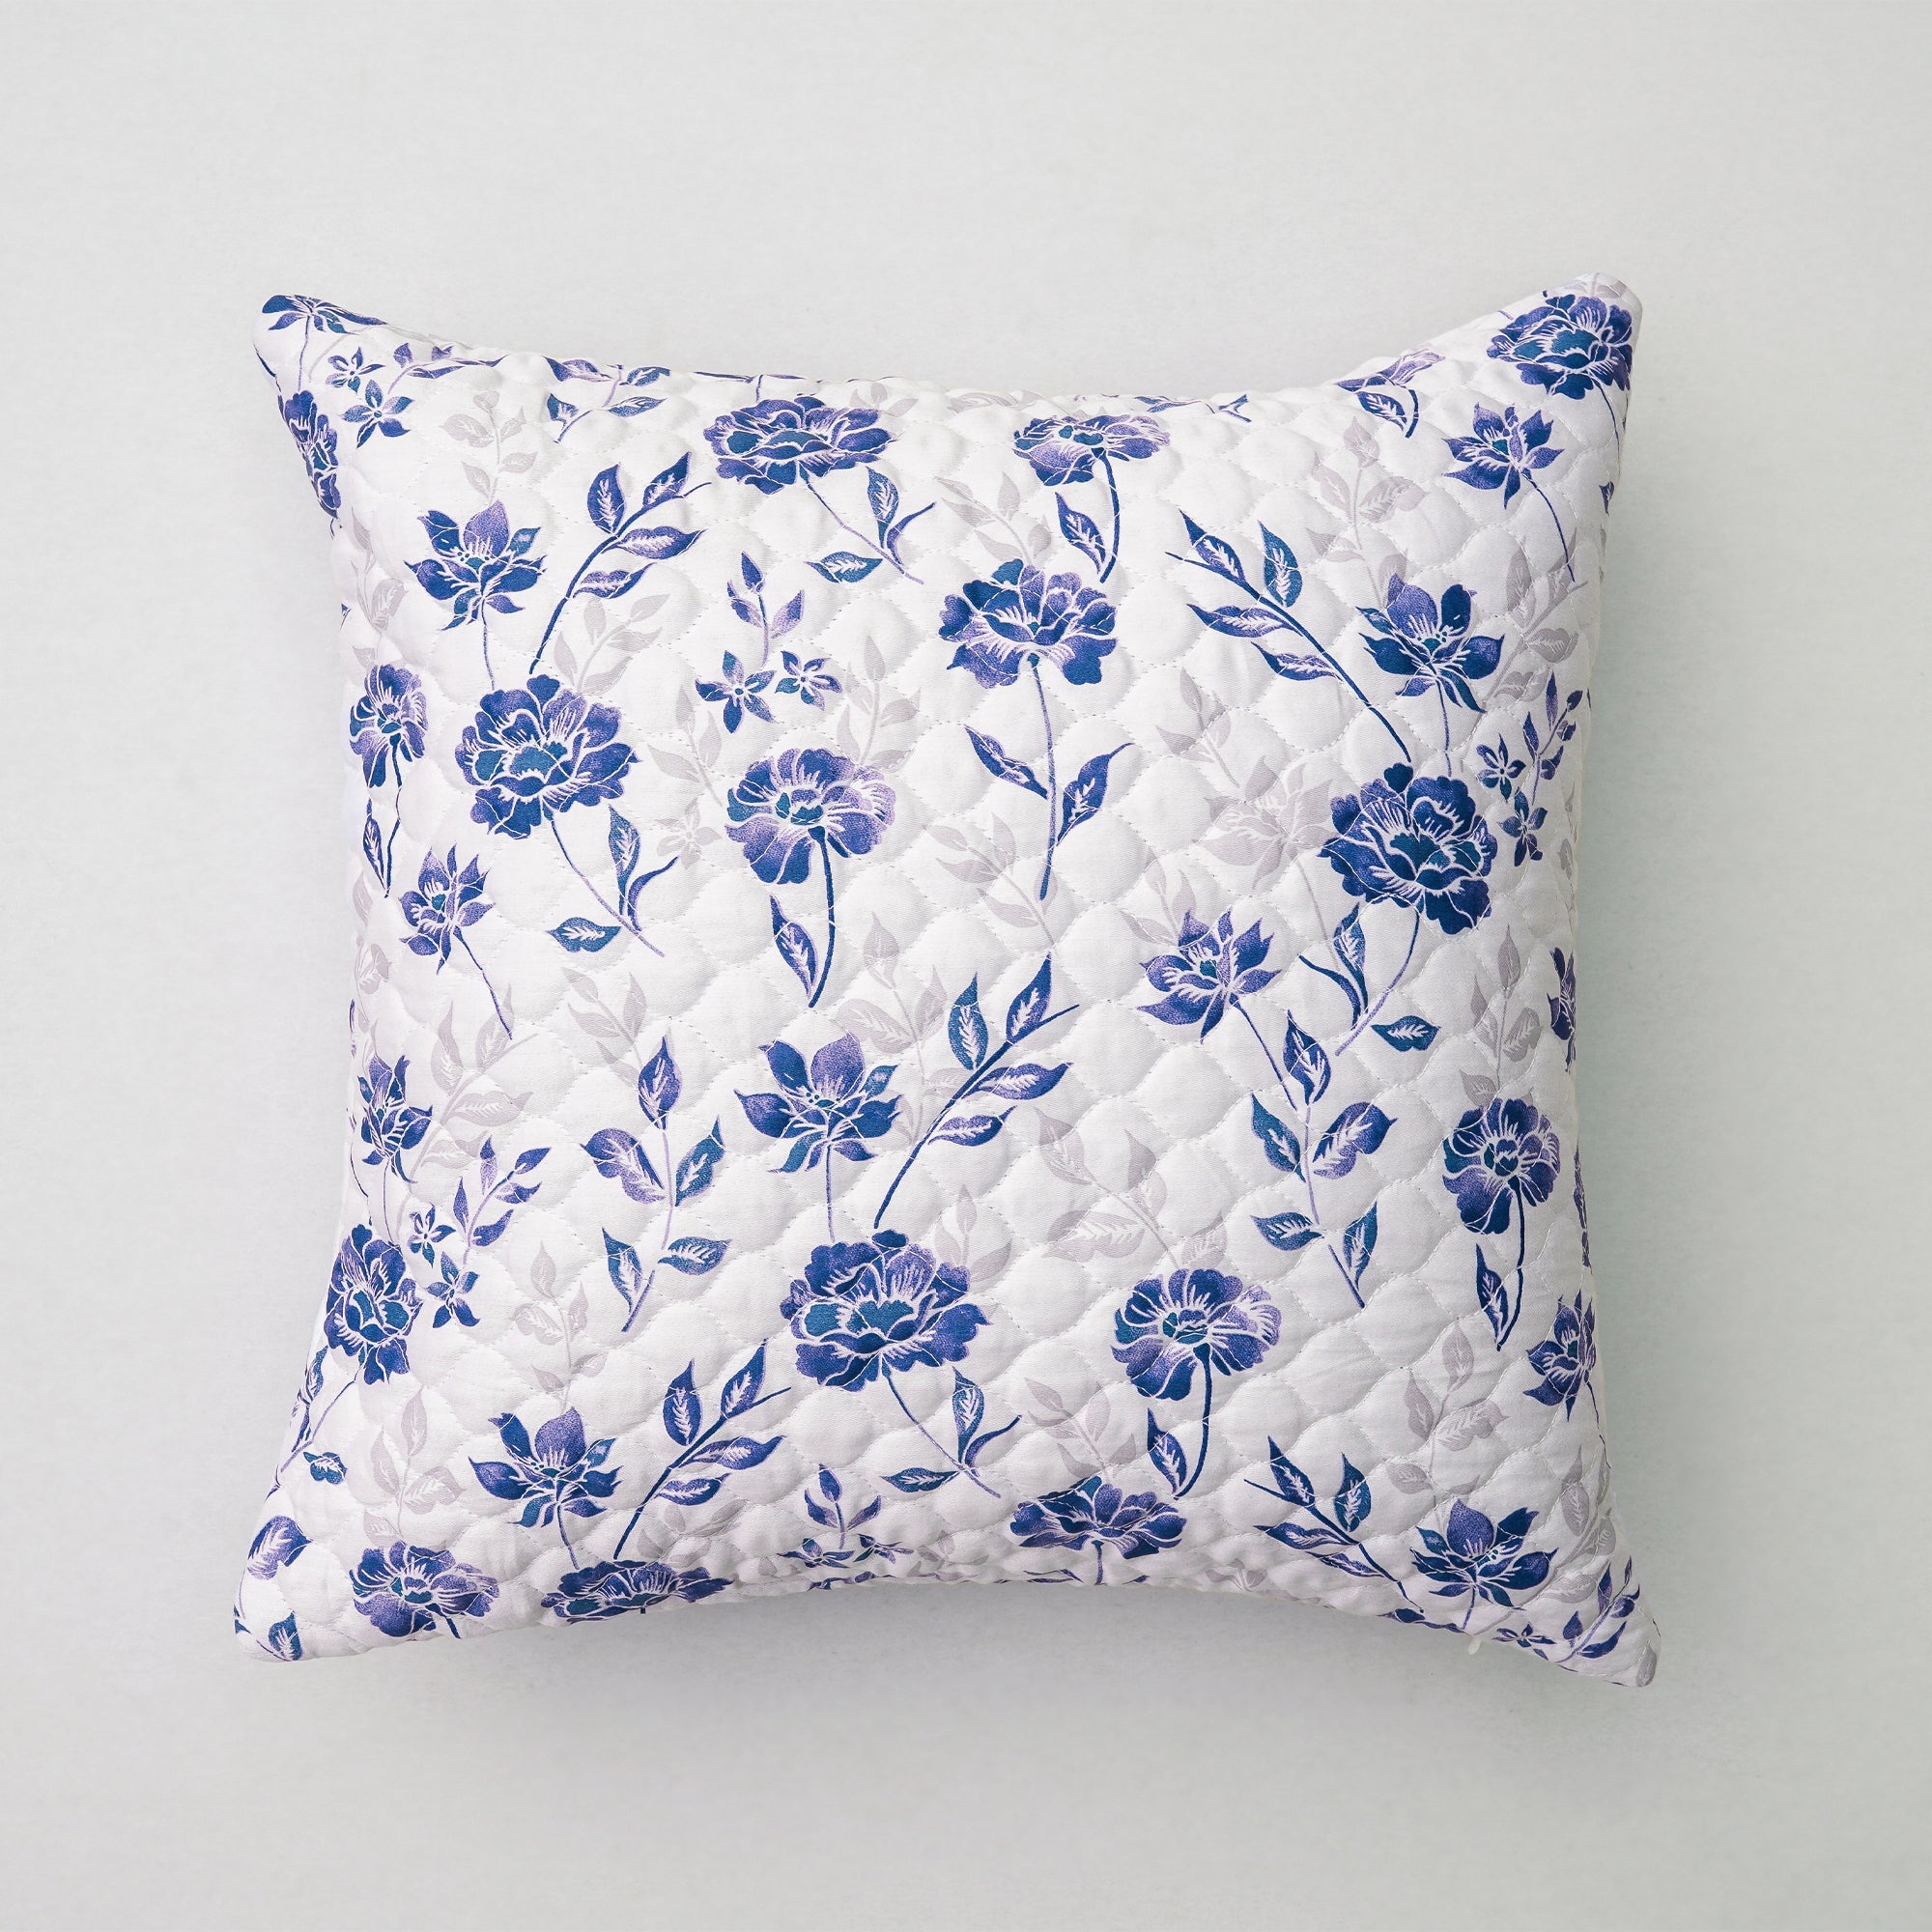 The Linen Company Accessories Standard Spring Storm Cushion Cover